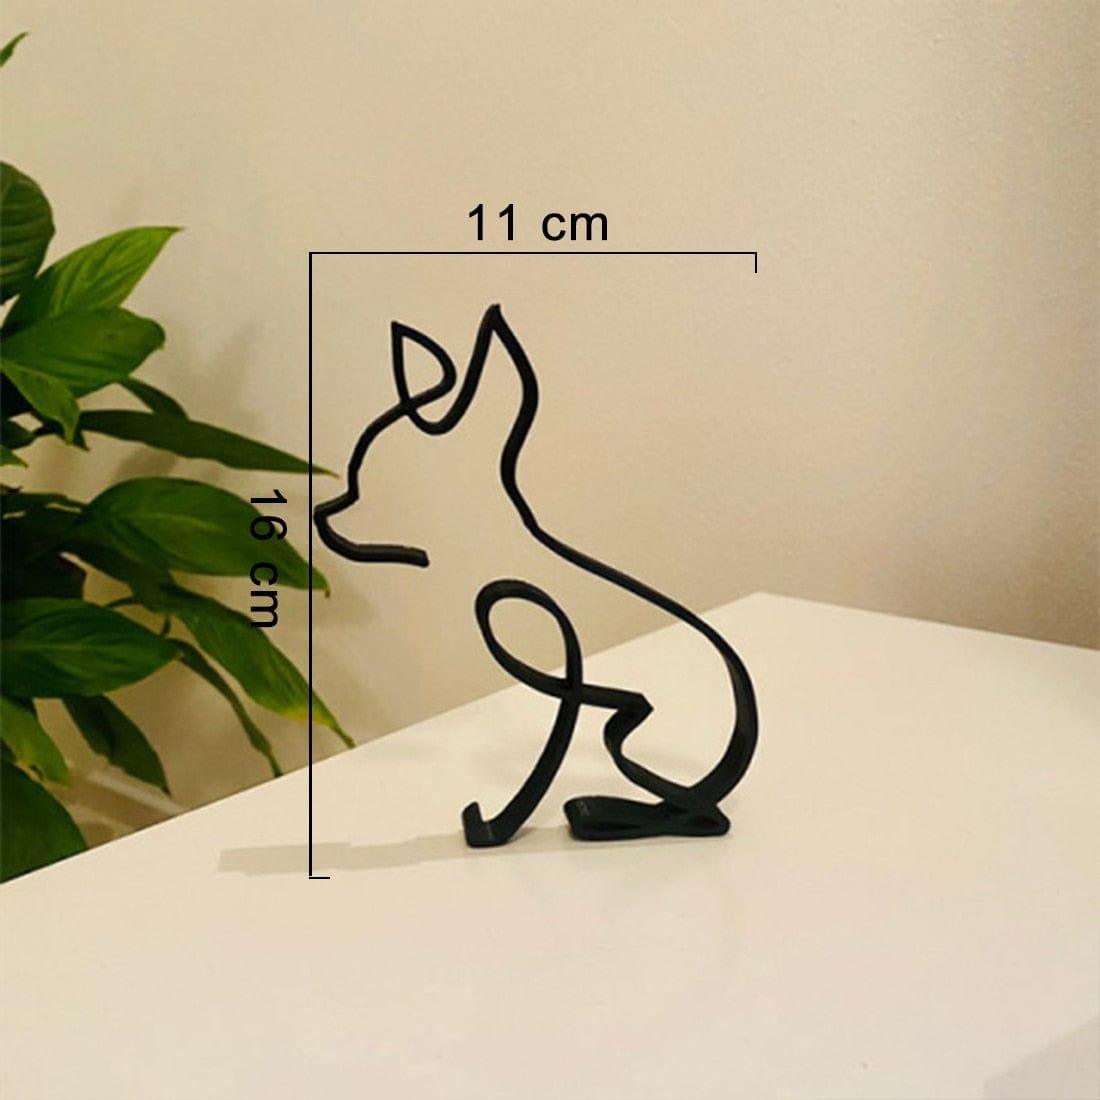 Shop 0 I Dog Art Sculpture Simple Metal Dog Abstract Art Sculpture for Home Party Office Desktop Decoration Cute Pet Dog Cats Gifts Mademoiselle Home Decor